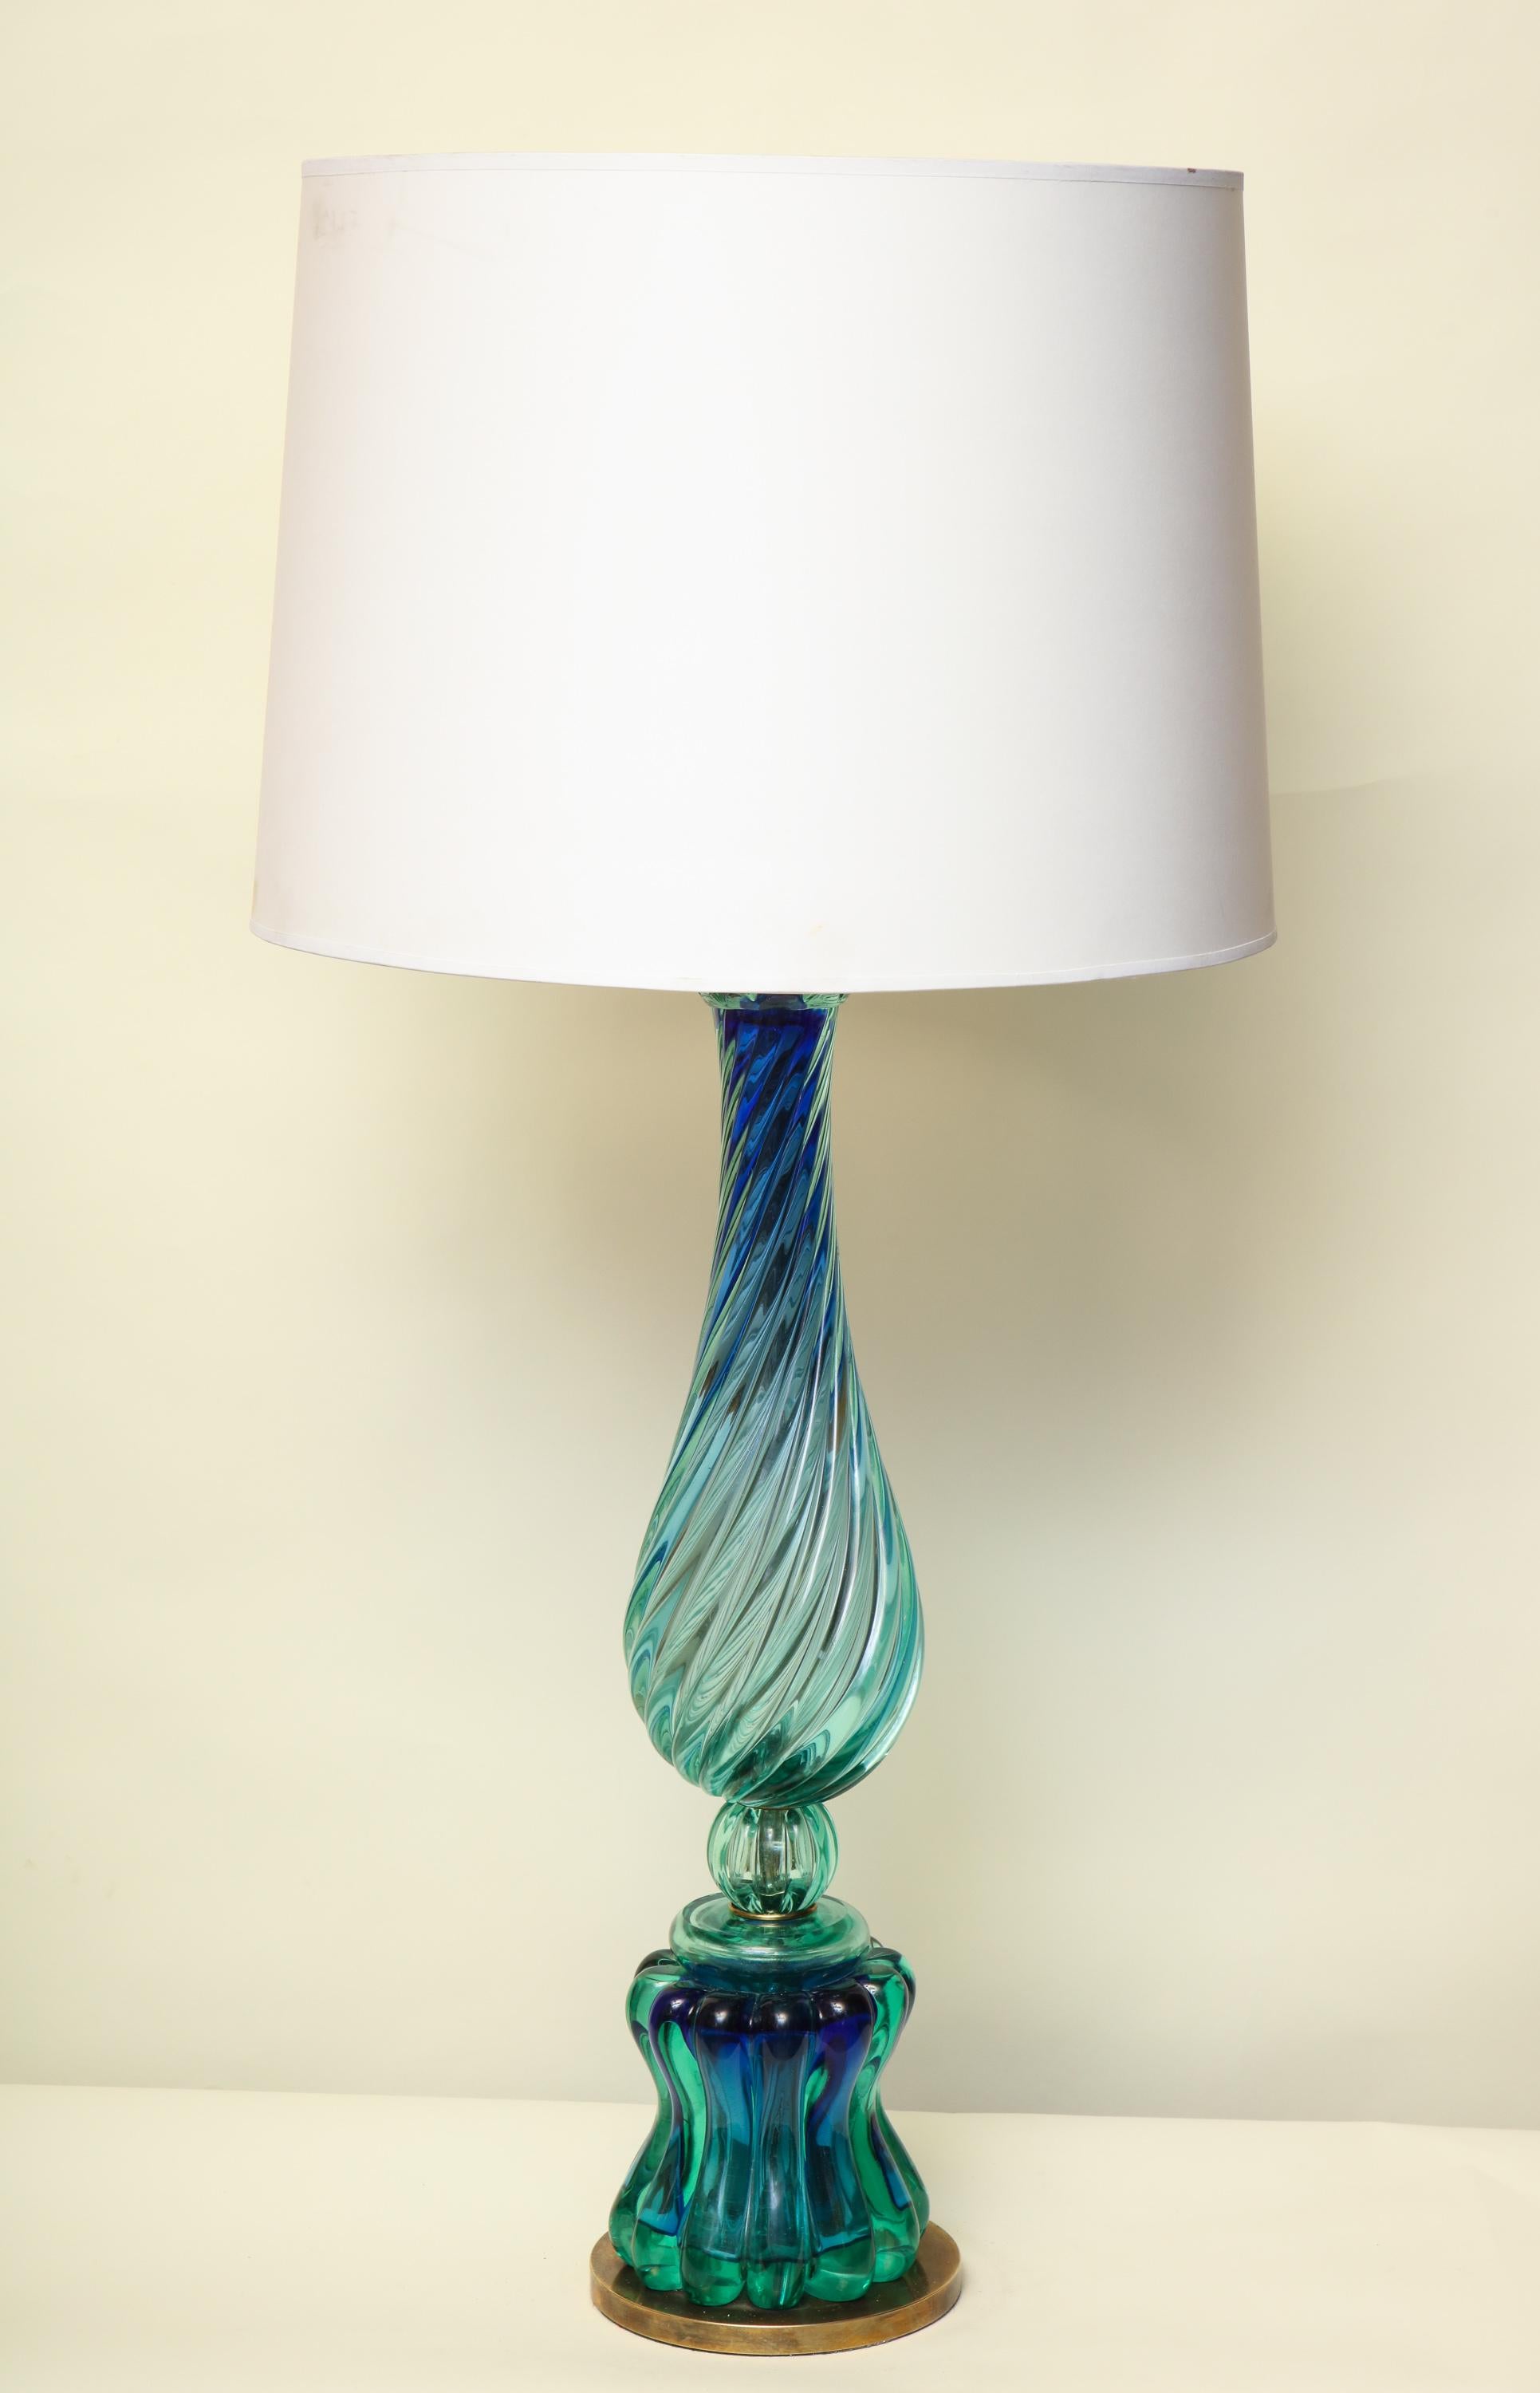 A Seguso table lamp Murano Art Glass radiant blue with patinated brass mounts Italy 1950s
New sockets and rewired
Shade included.